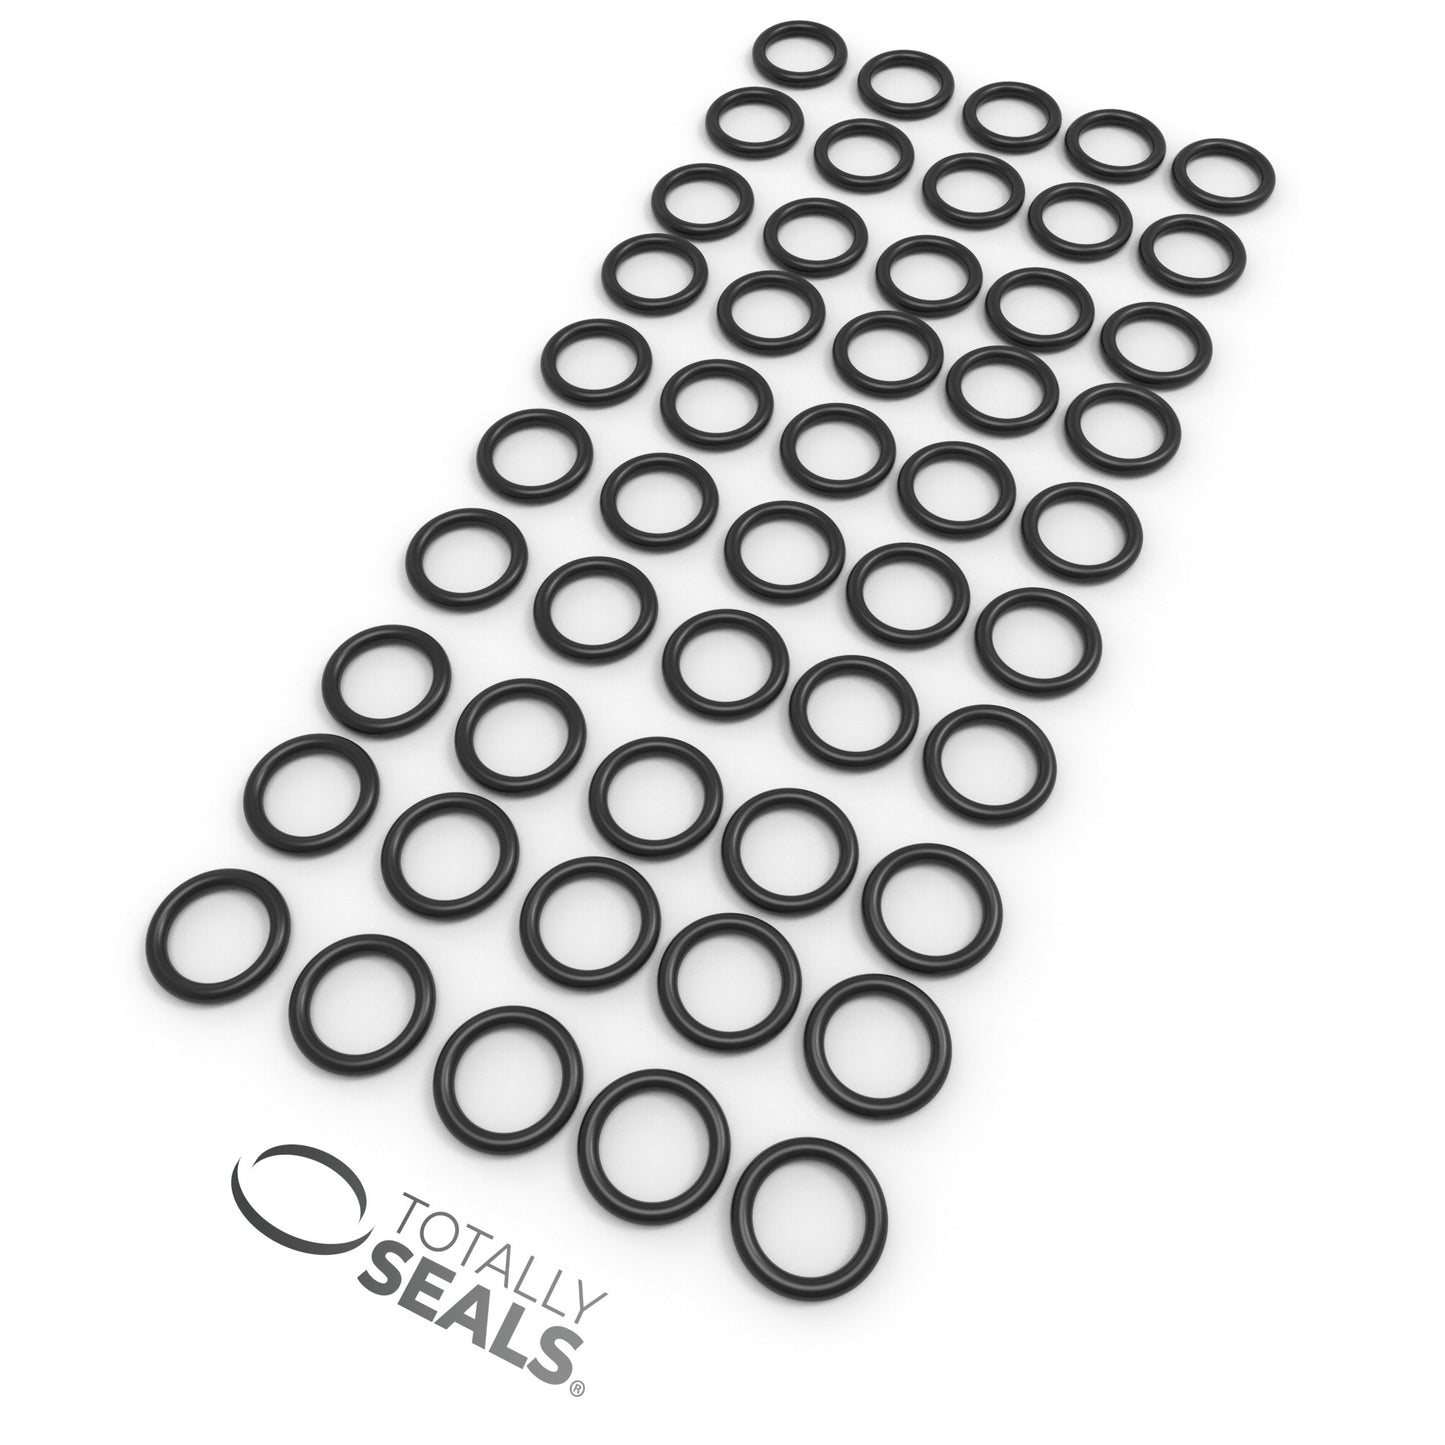 19mm x 3.5mm (26mm OD) Nitrile O-Rings - Totally Seals®